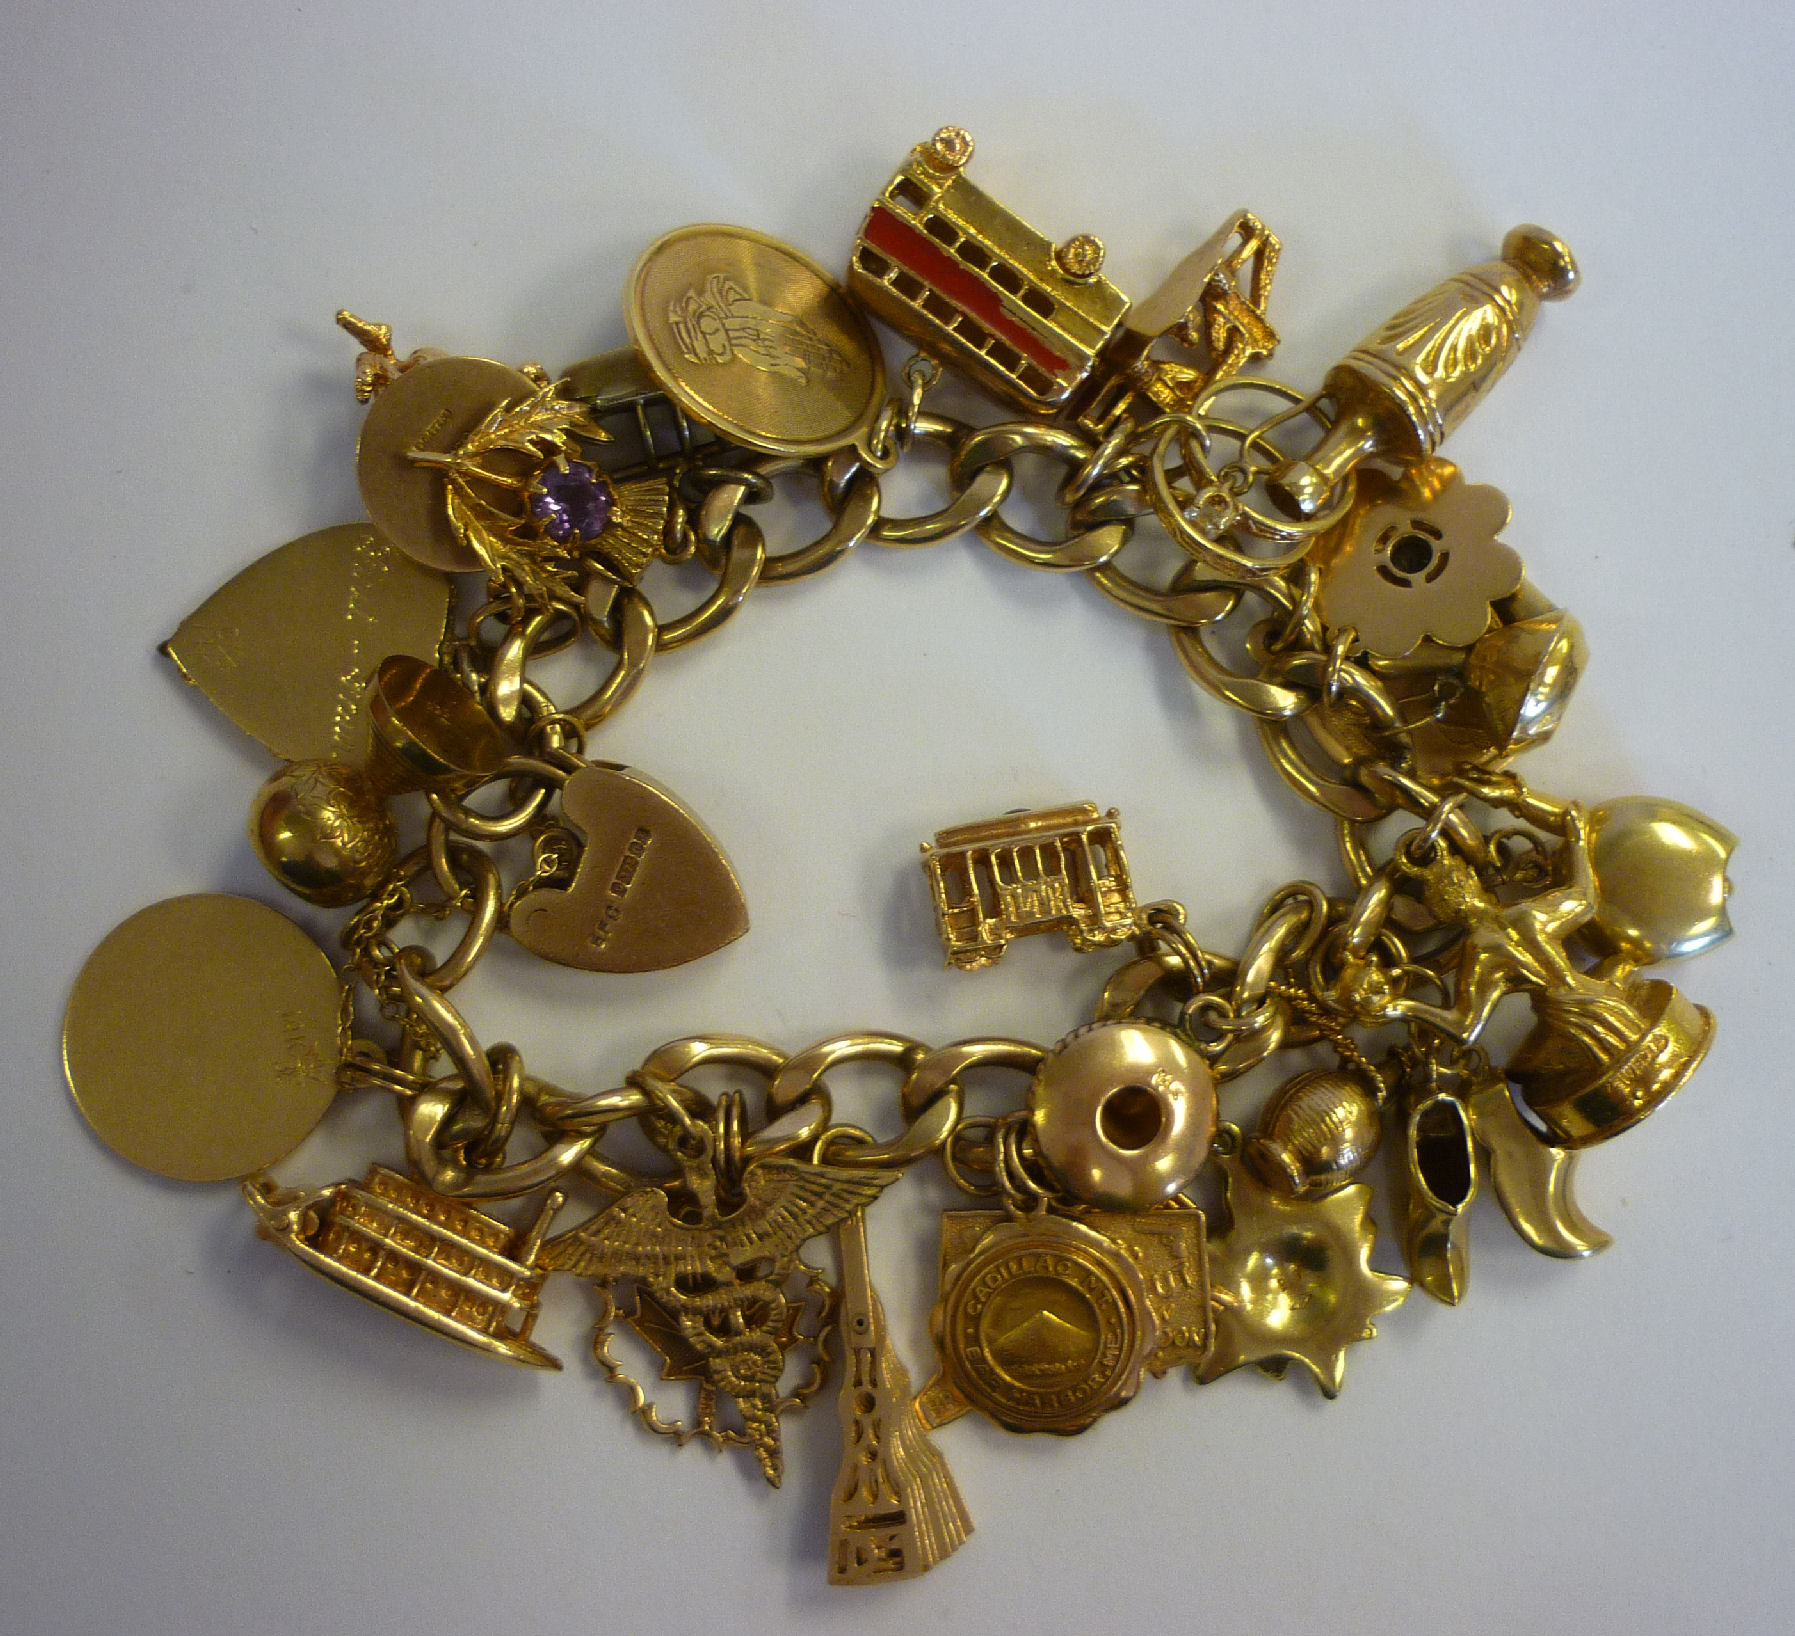 A 9ct gold bracelet with twenty-eight assorted charms